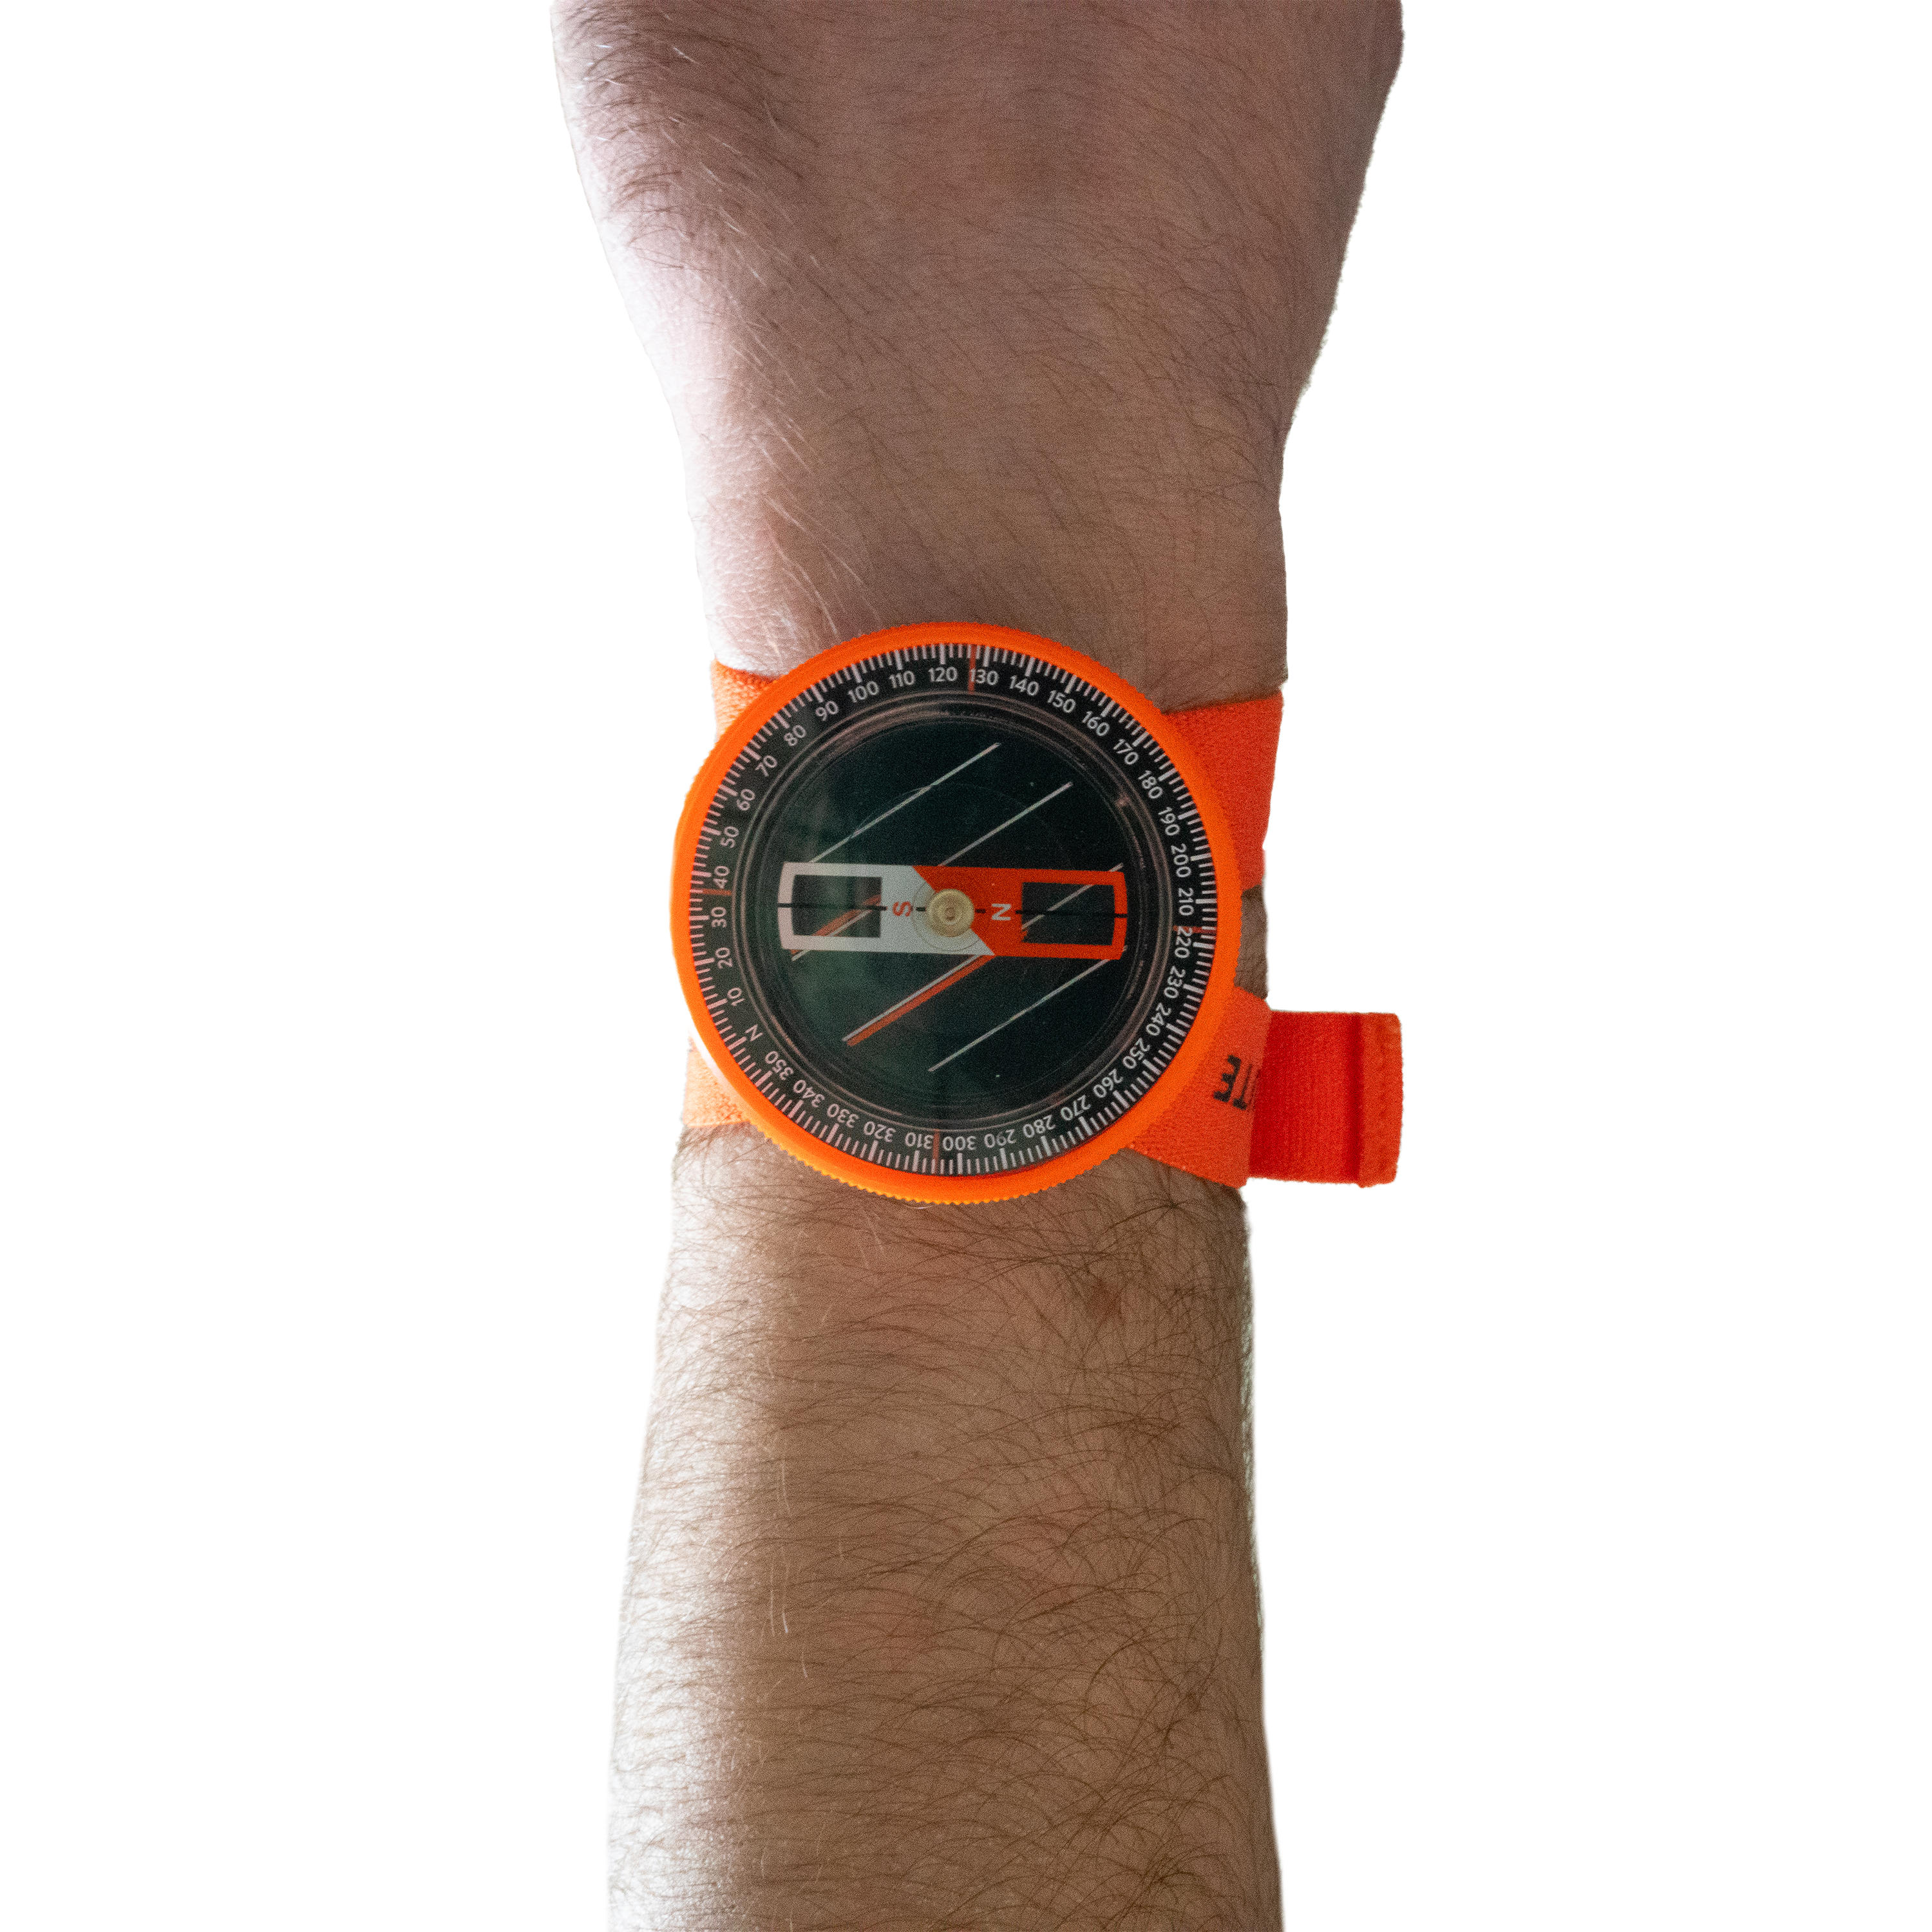 QUICK and STABLE WRIST compass for MULTISPORT adventure racing - orange black 6/6